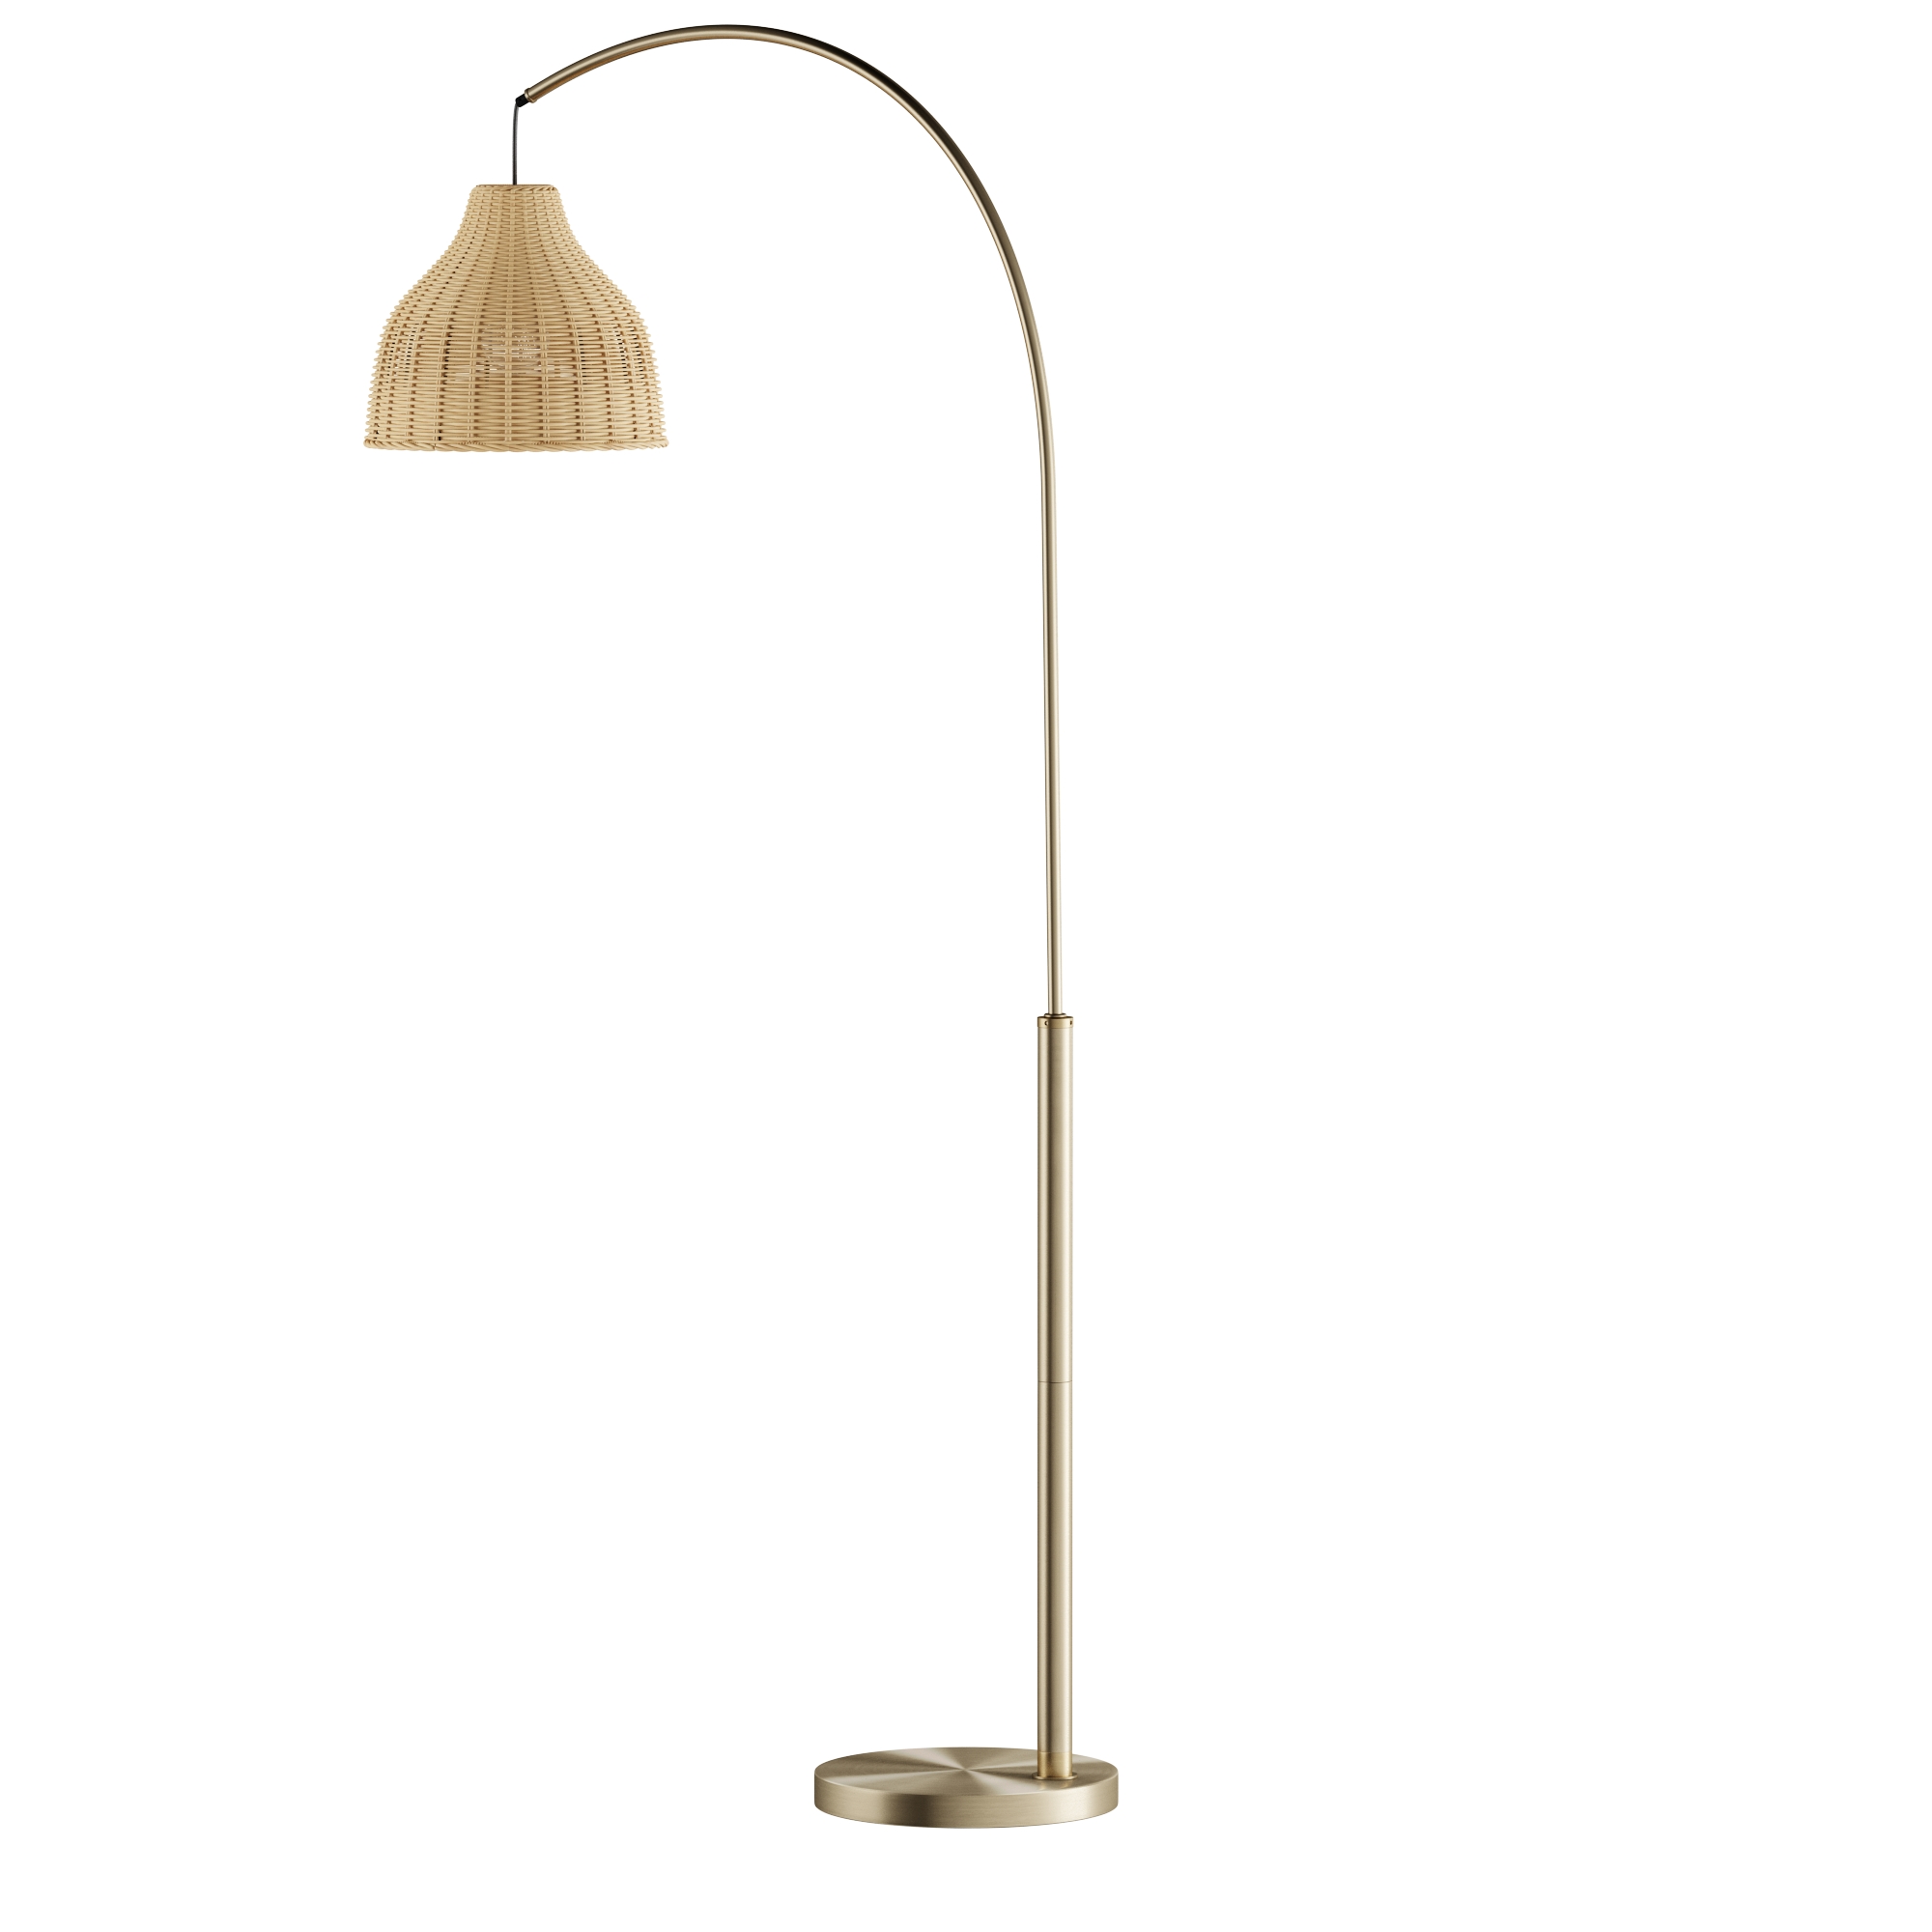 AloaDecor Lighting 1-Light Antique Brass Gold Arc Floor Lamp with  Hand-woven Bamboo Shade in the Floor Lamps department at